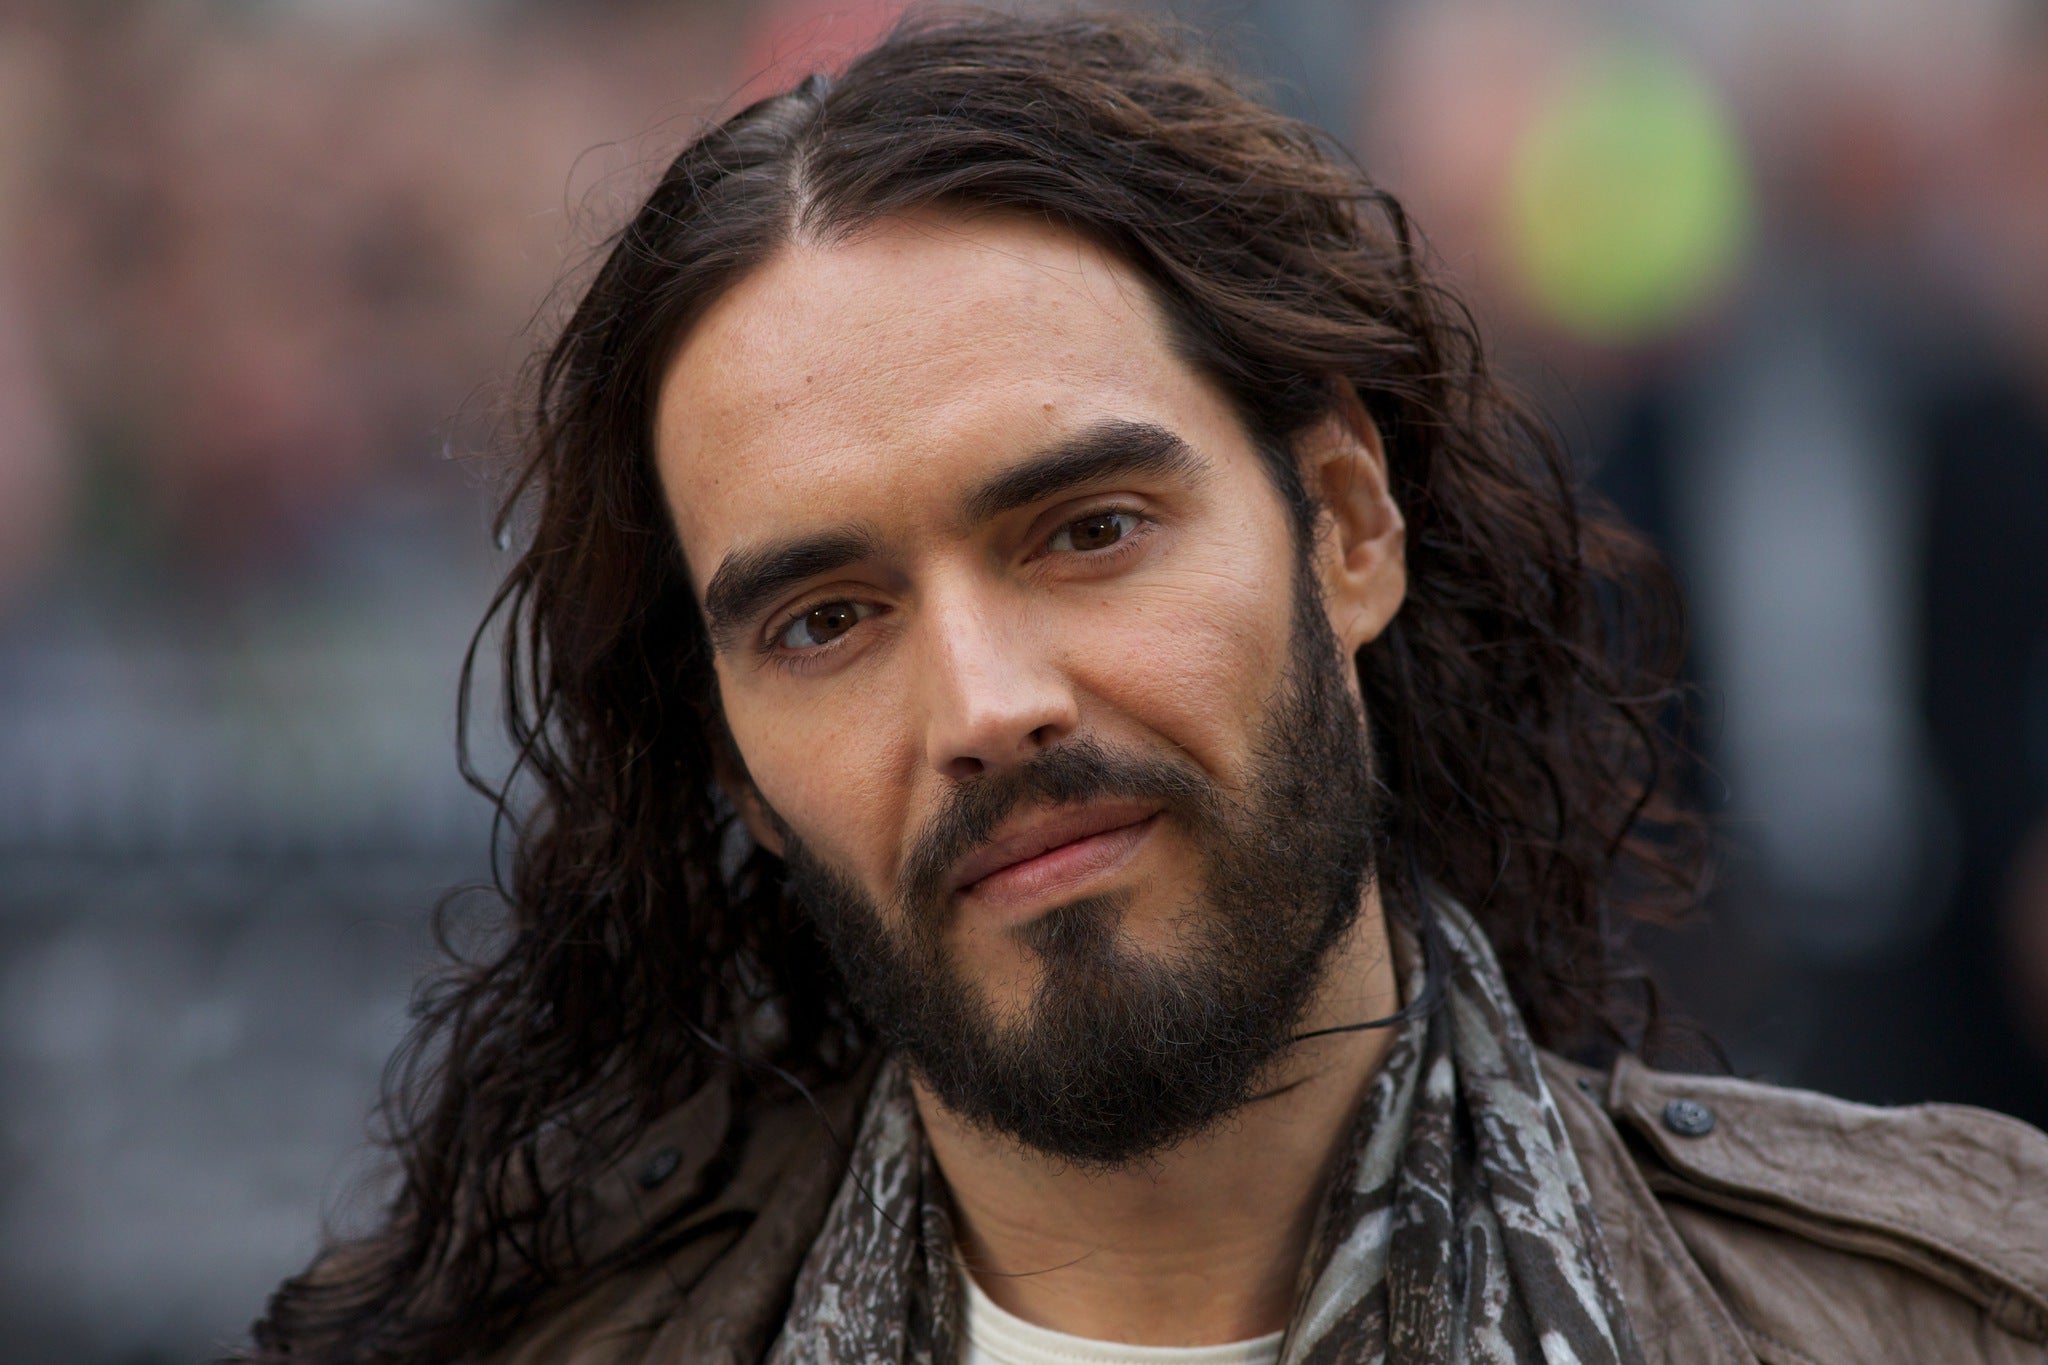 Russell Brand takes on Bill O'Reilly